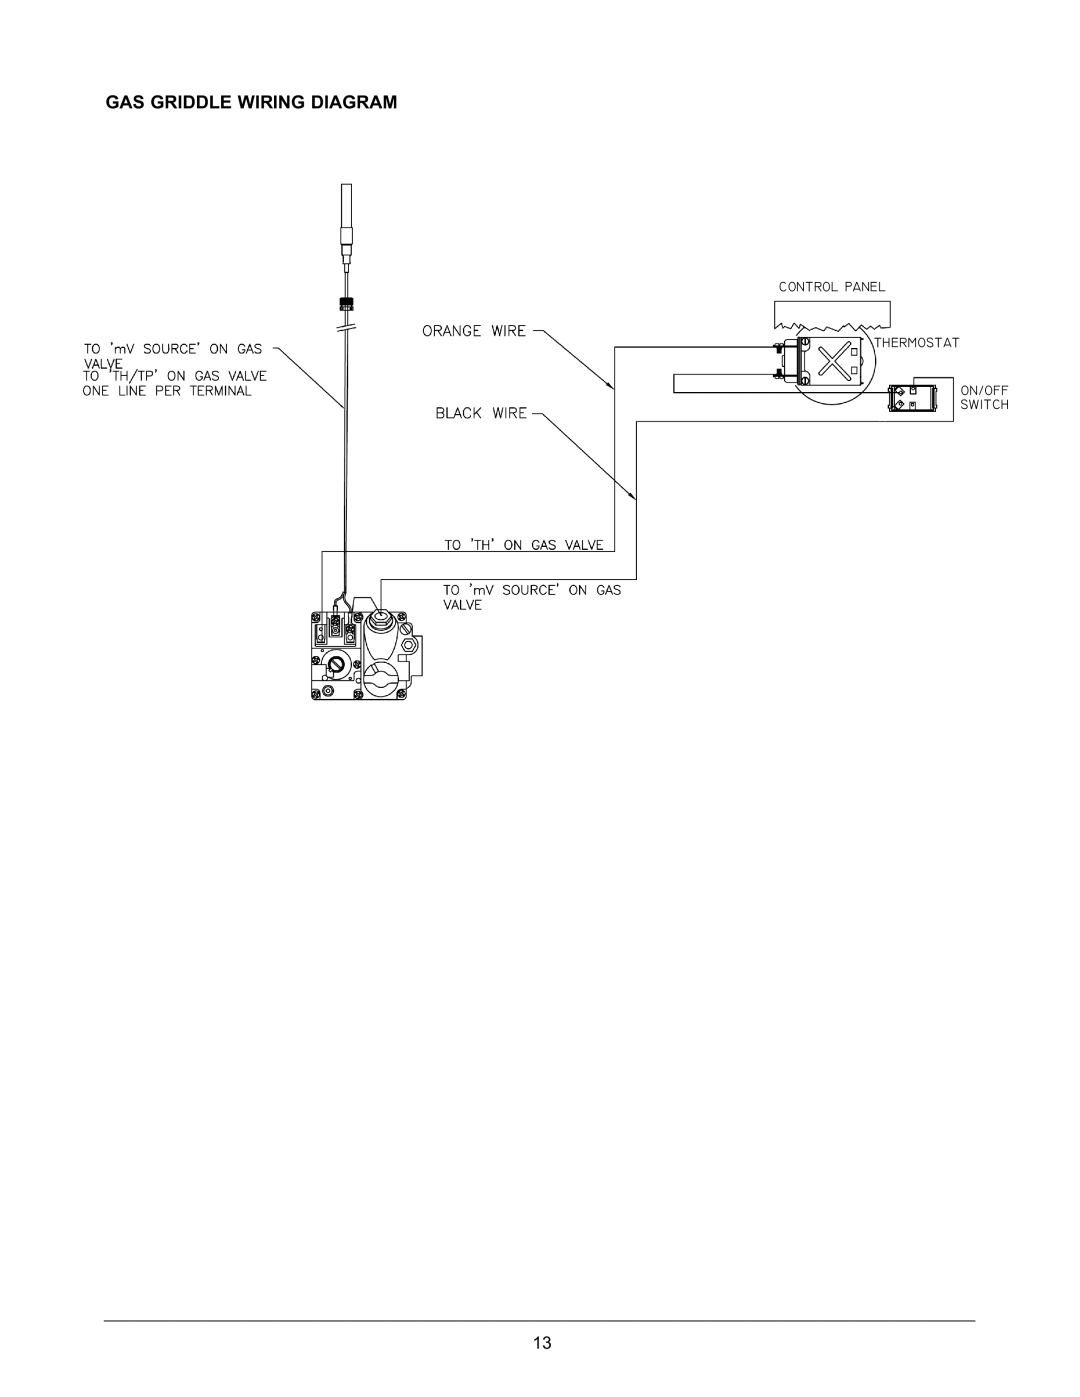 Keating Of Chicago 37399 user manual Gas Griddle Wiring Diagram, Control Panel Thermostat On/Off Switch 